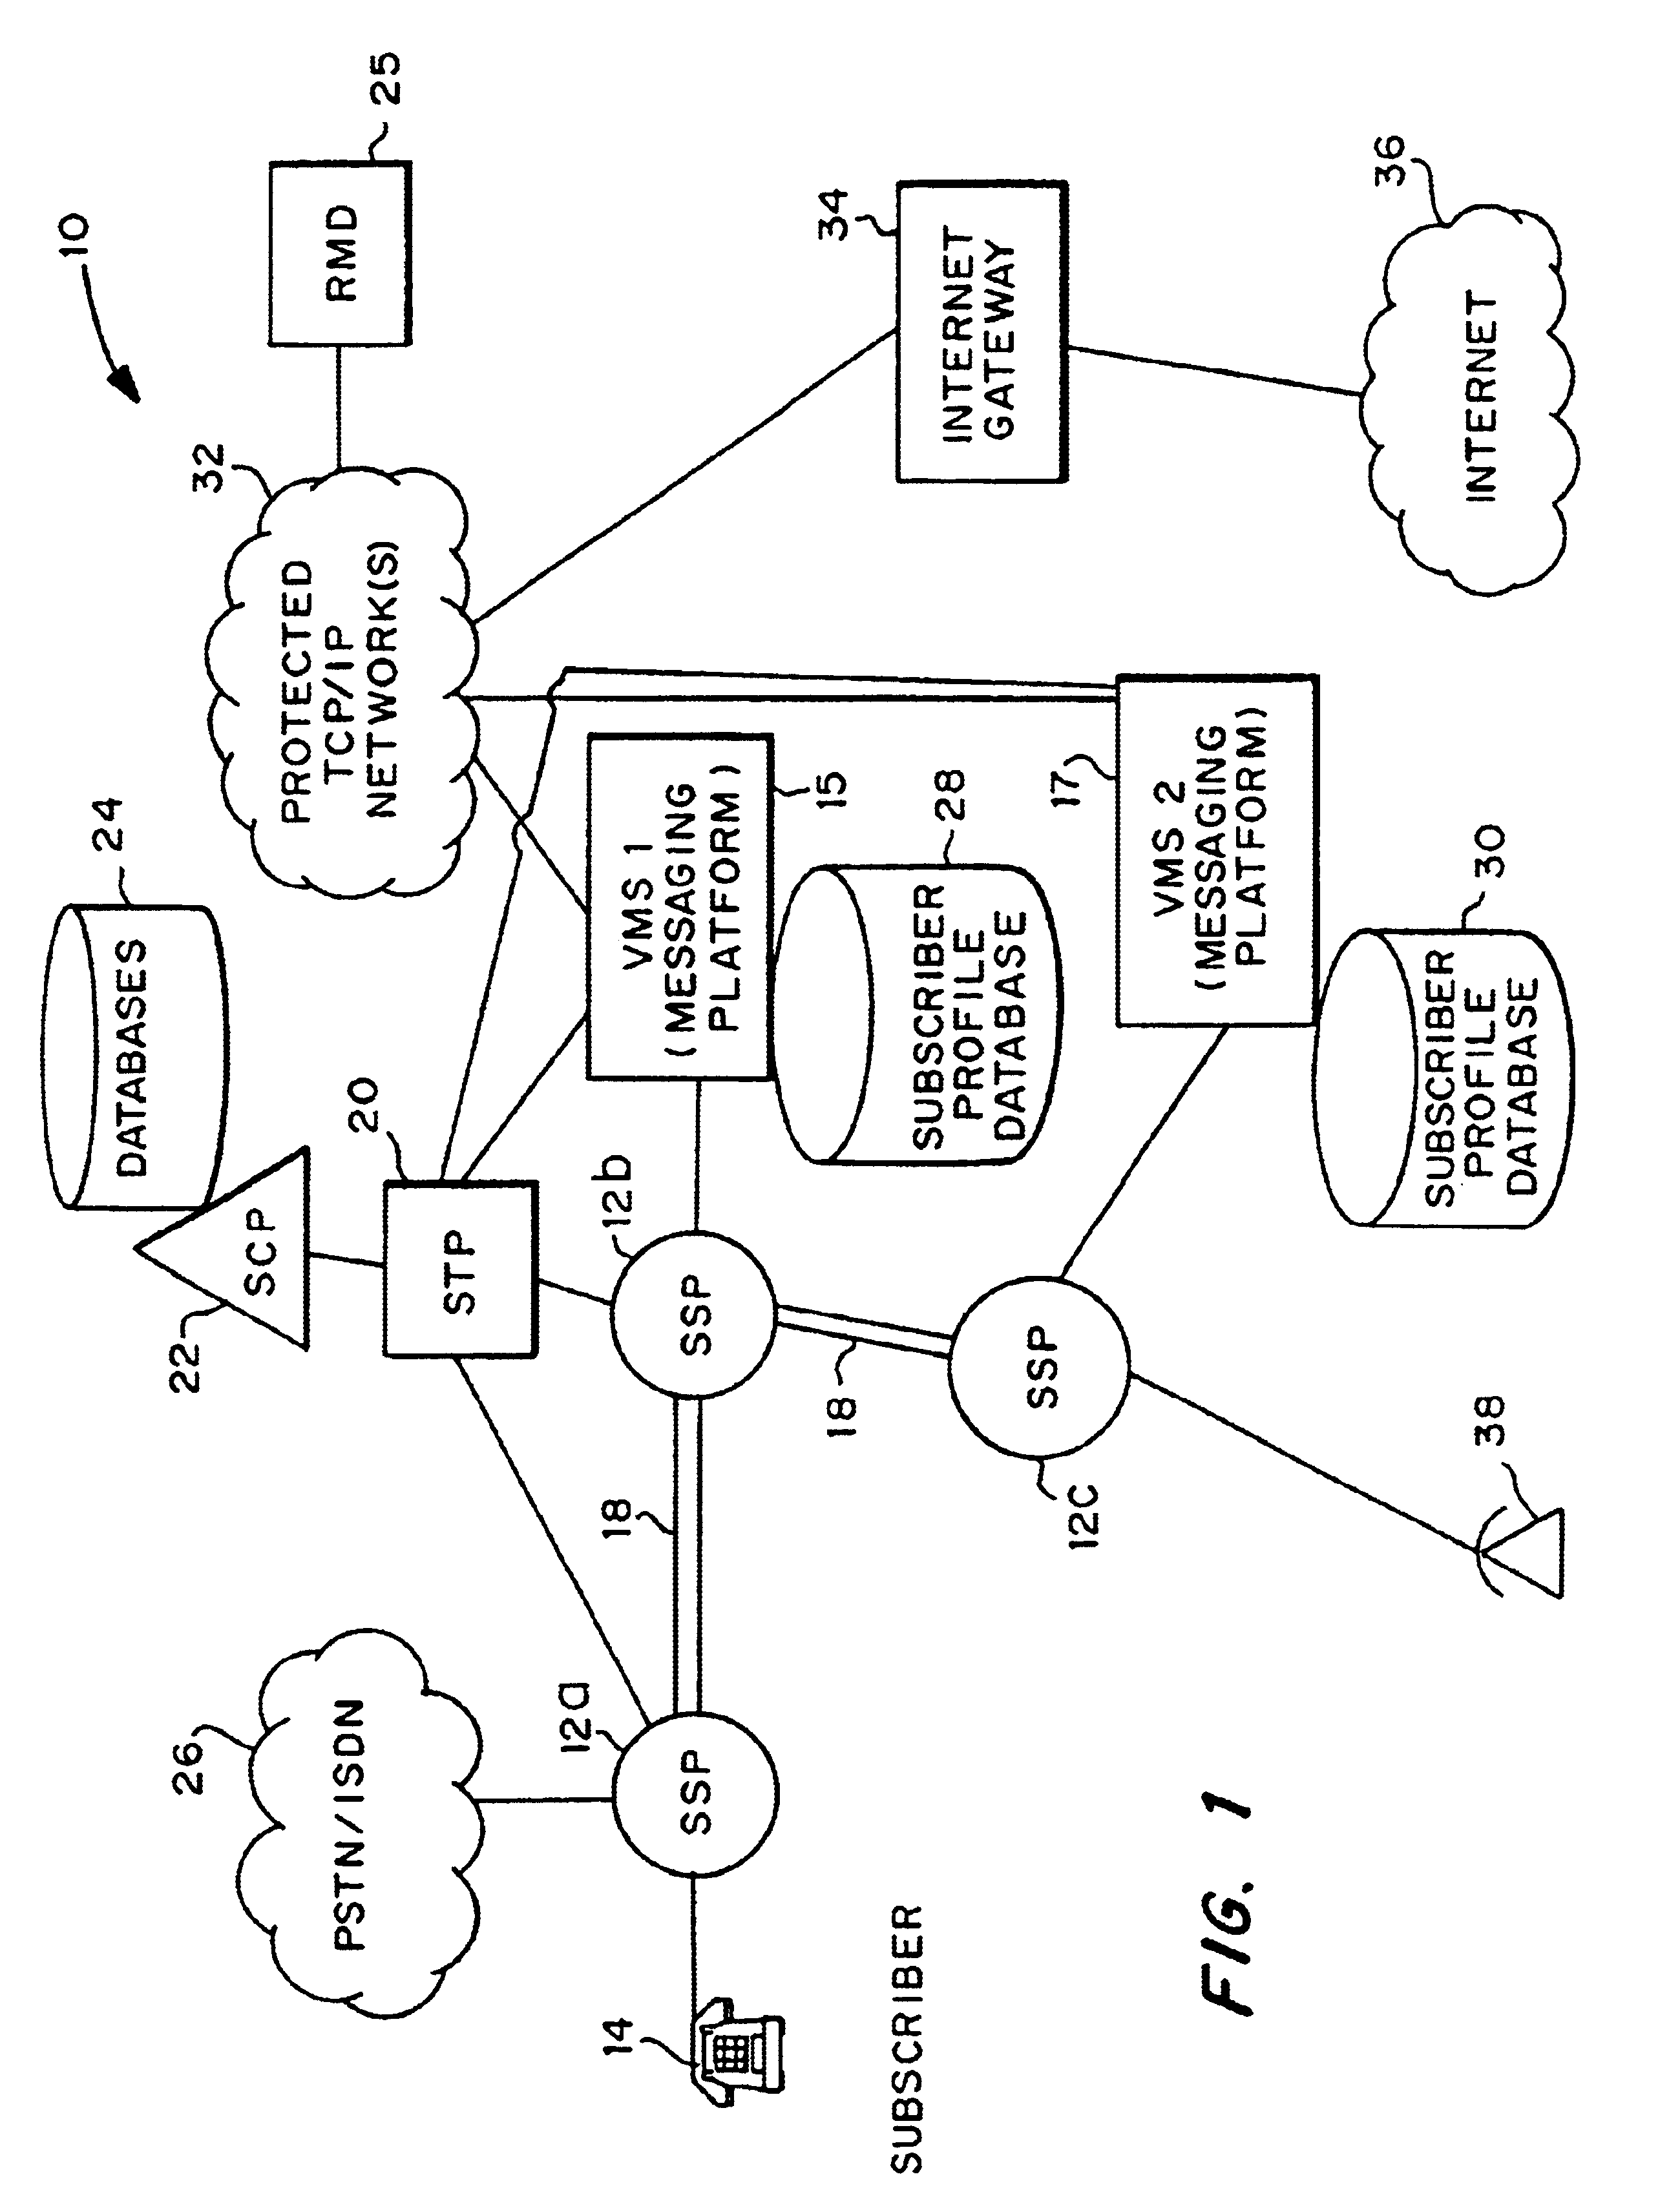 Region-wide messaging system and methods including validation of transactions